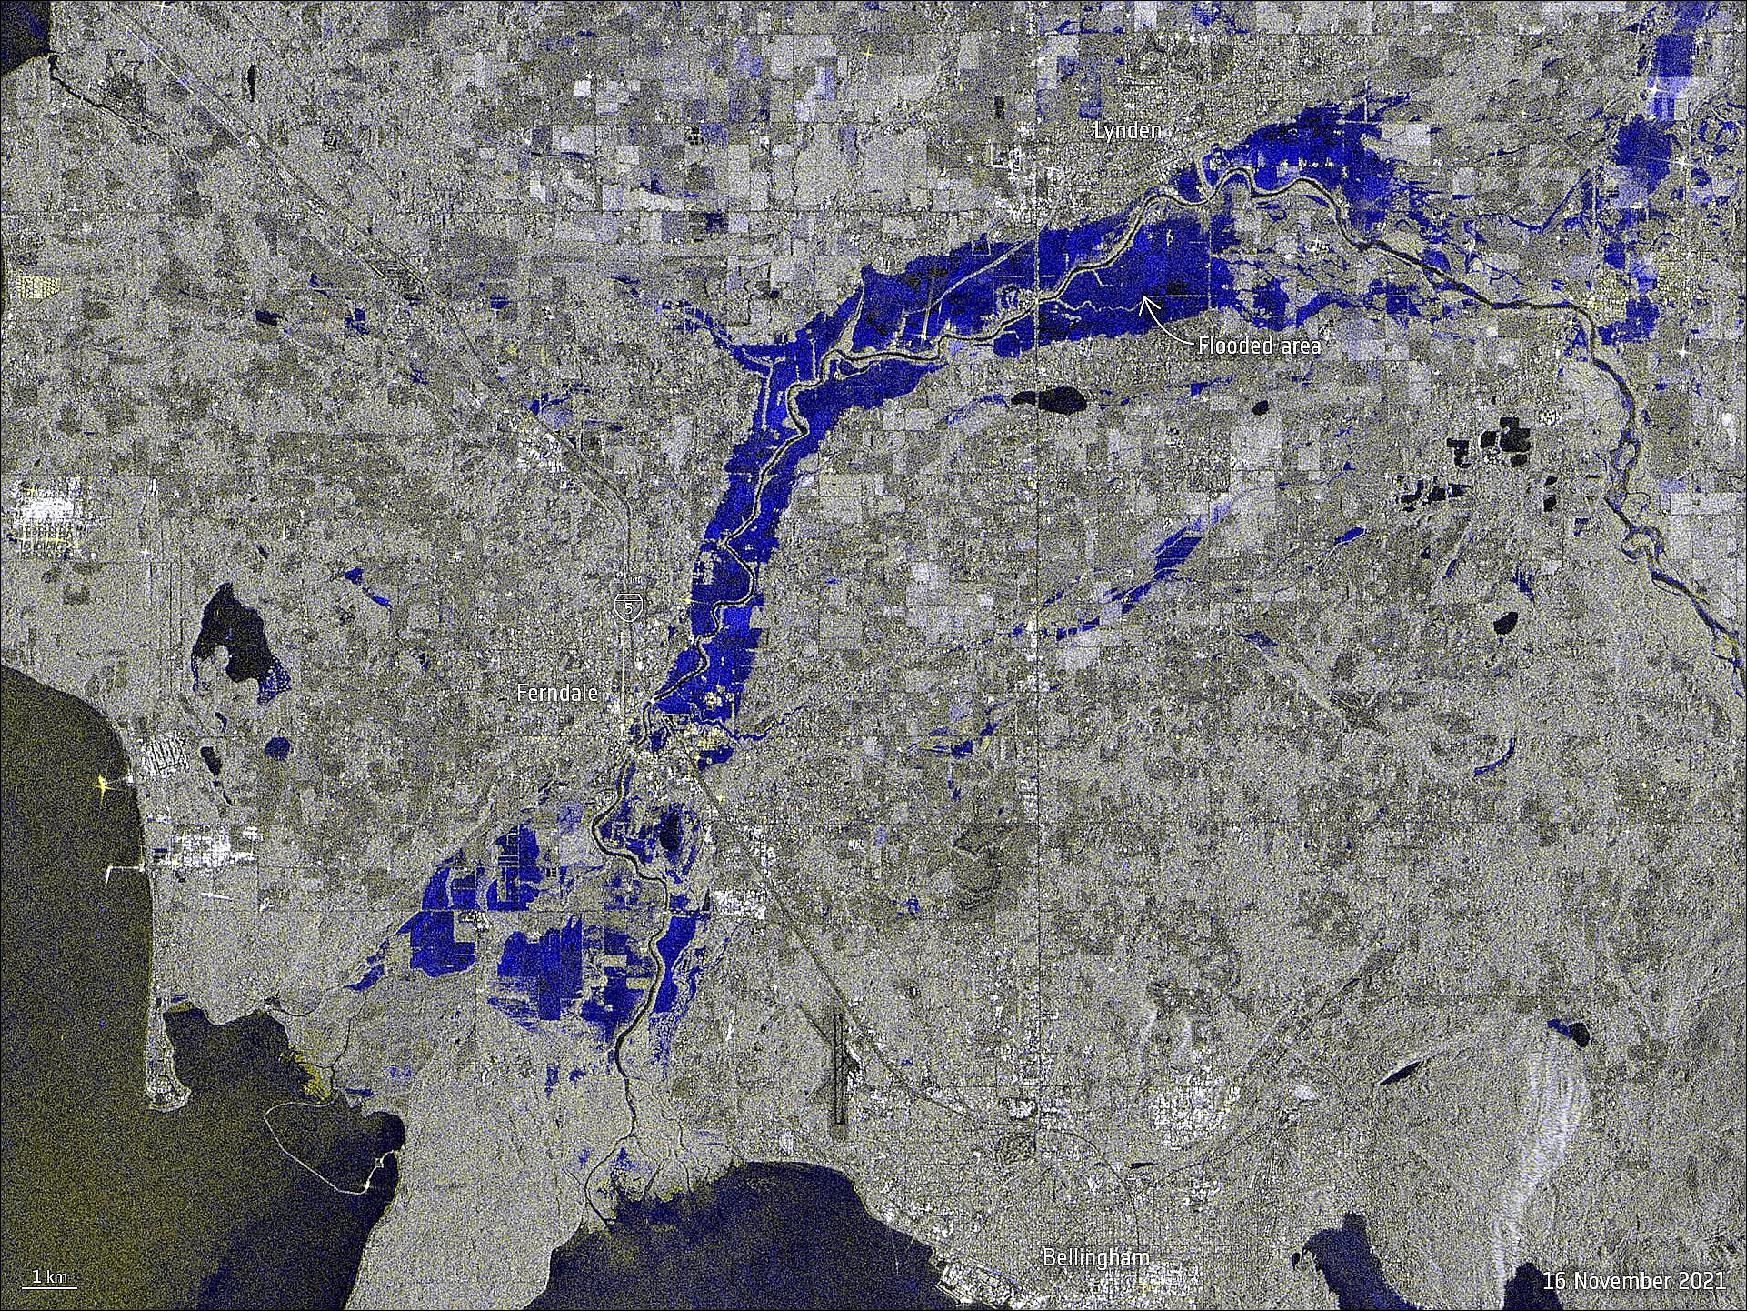 Figure 8: This SAR (Synthetic Aperture Radar) image uses information from two separate acquisitions captured by the Copernicus Sentinel-1 mission on 4 November and 16 November 2021 and shows the extent of the flooding of the Nooksack River in dark blue (image credit: ESA)